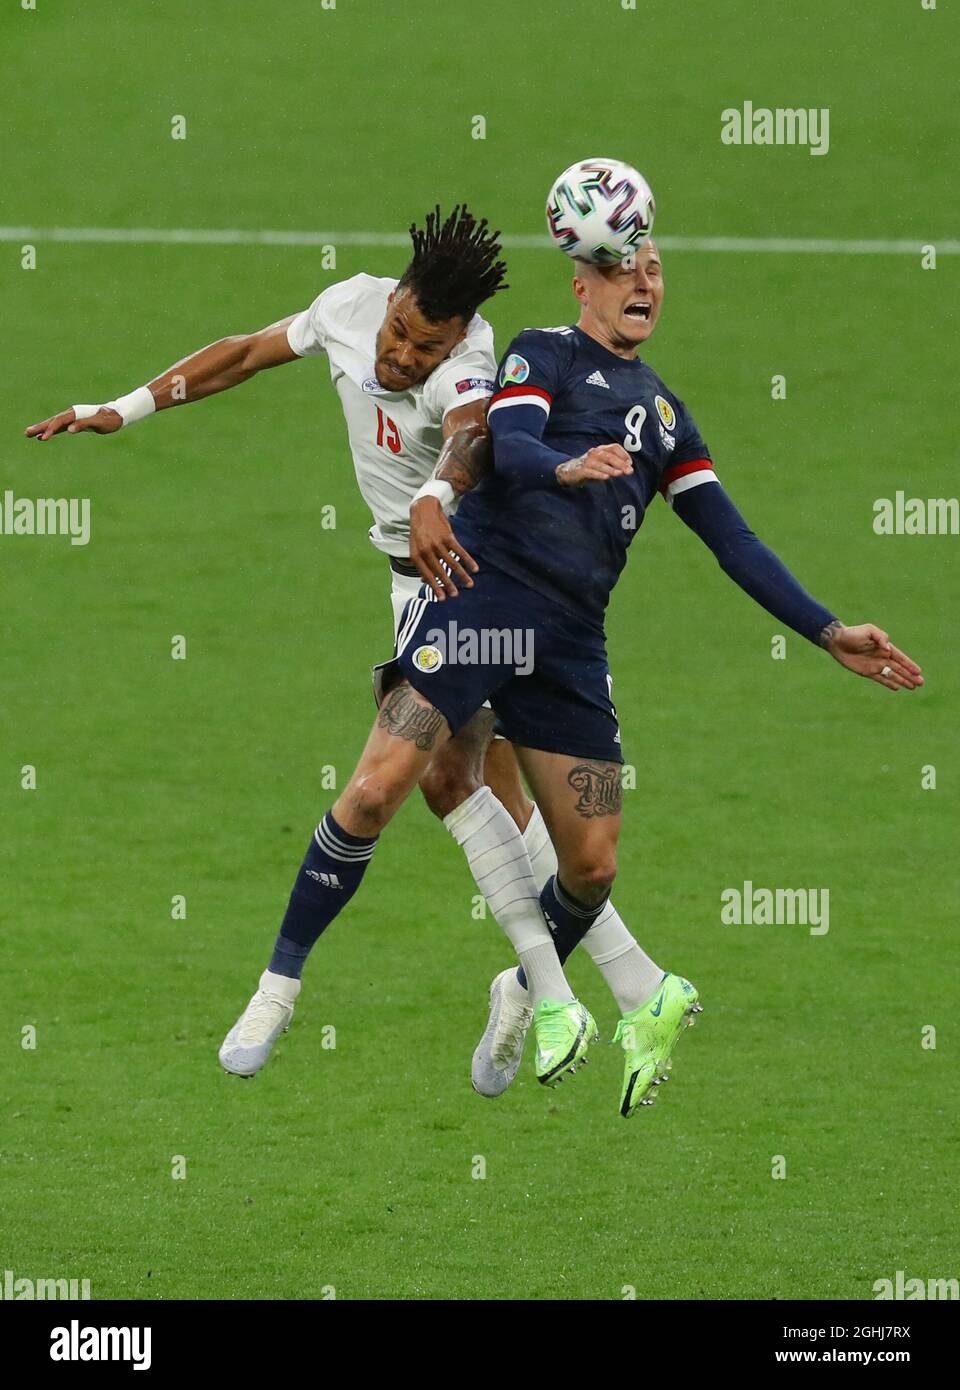 London, England, 18th June 2021. Tyrone Mings of England challenges Lyndon Dykes of Scotland during the UEFA European Championships match at Wembley Stadium, London. Picture credit should read: David Klein / Sportimage via PA Images Stock Photo